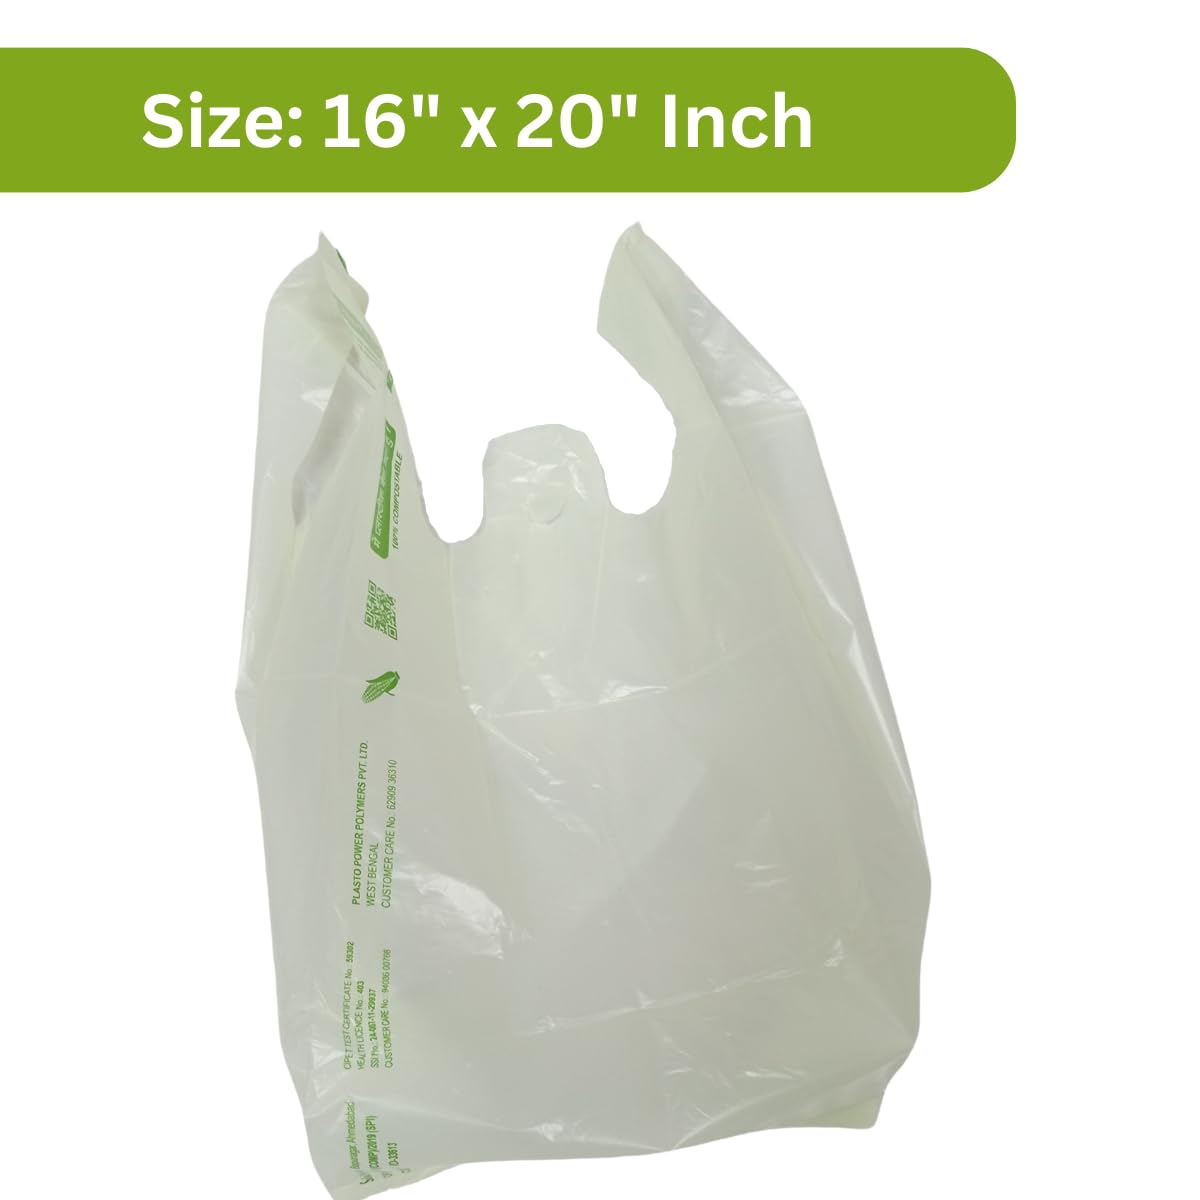 SINGHAL Biodegradable Carry Bags | Certified Compostable Carry Bag | Eco Friendly Shopping Bags for Home, Grocery Store Bag (Combo Pack of 100 x 2) 16x20 Inches